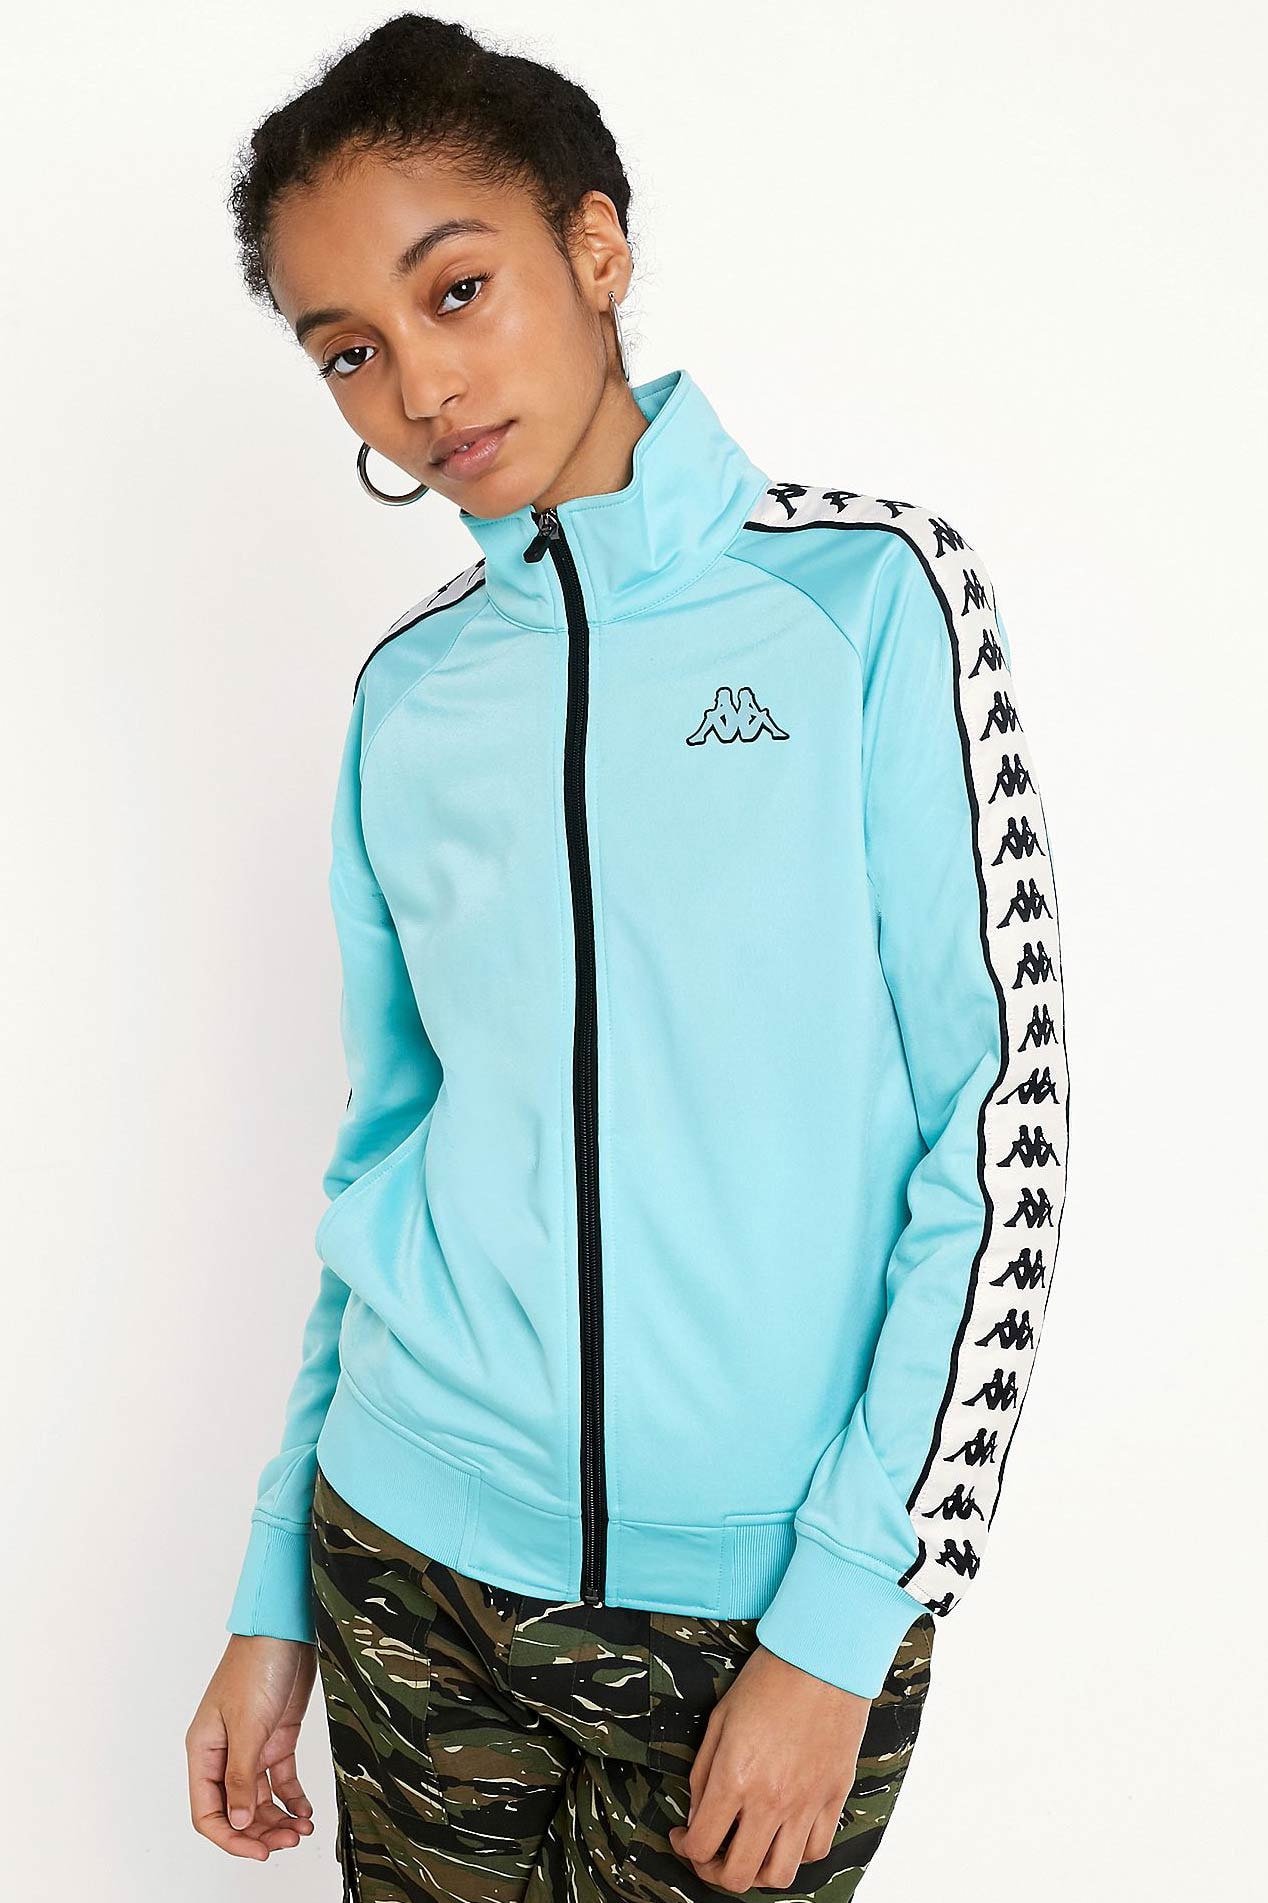 Kappa Track Jacket and Popper Pants in Turquoise | Hypebae